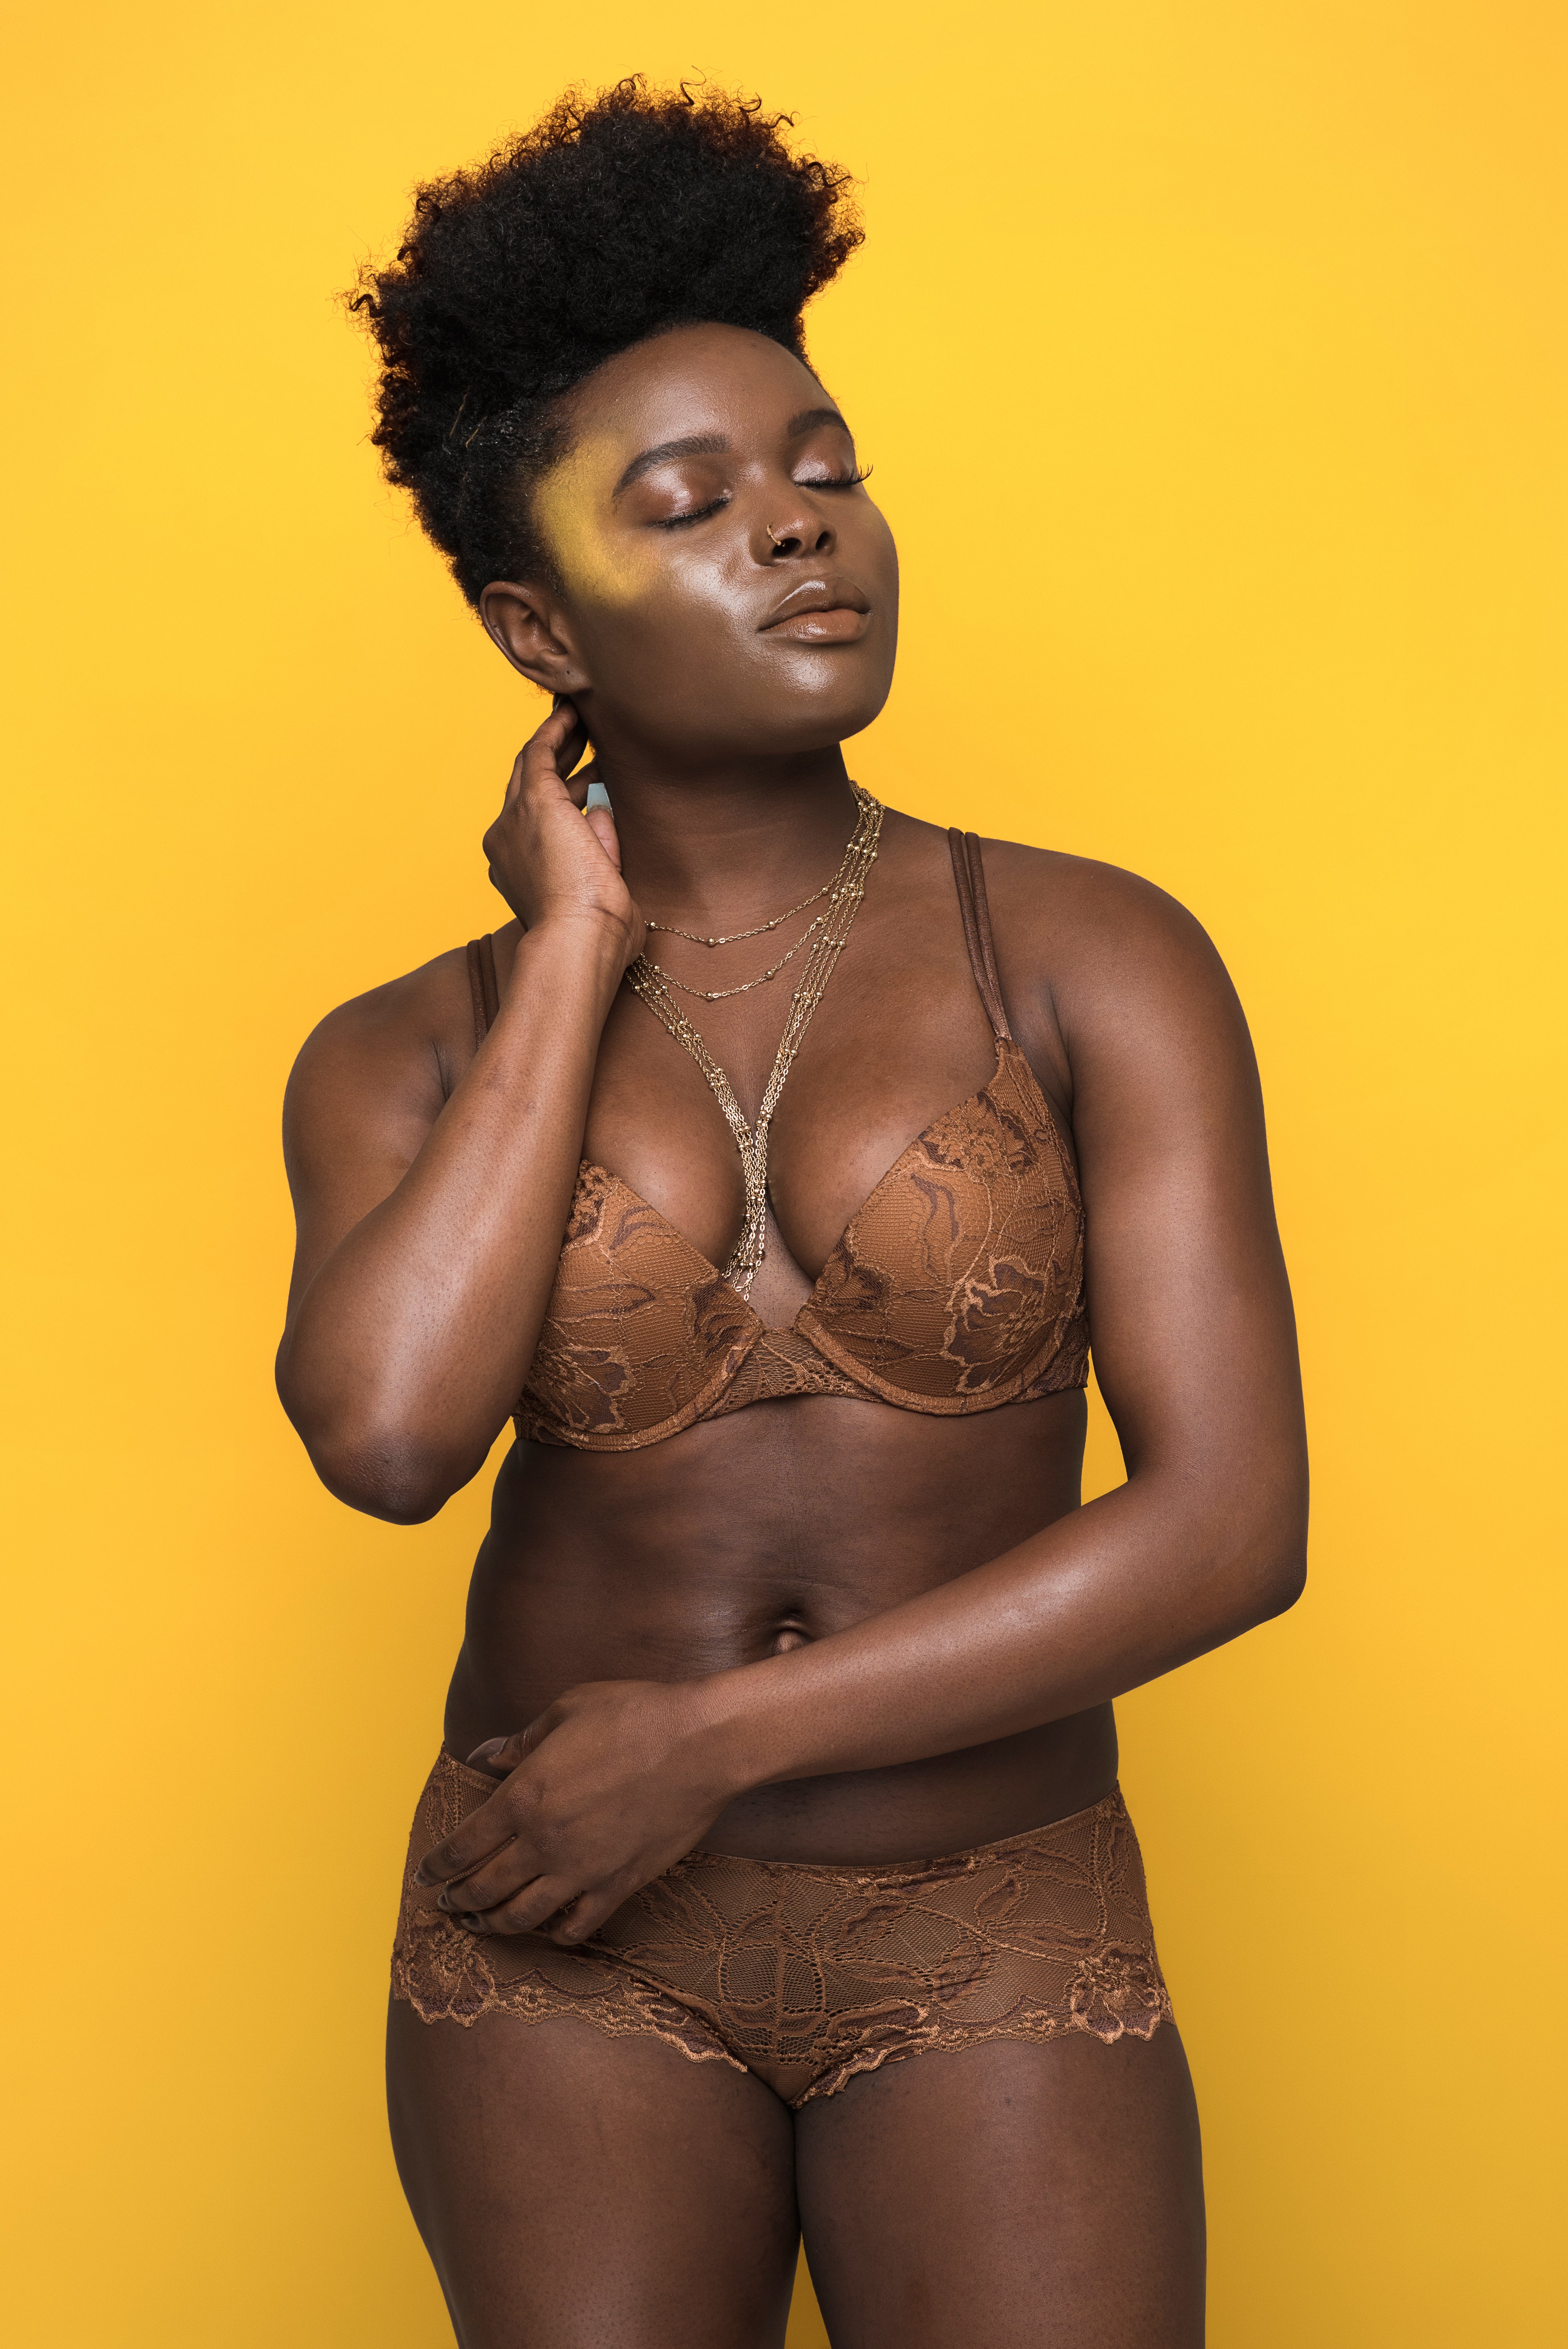 The Colored Girl Features Nubian Skin and Chiki Miki in ‘FULL BLOOM’ Campaign